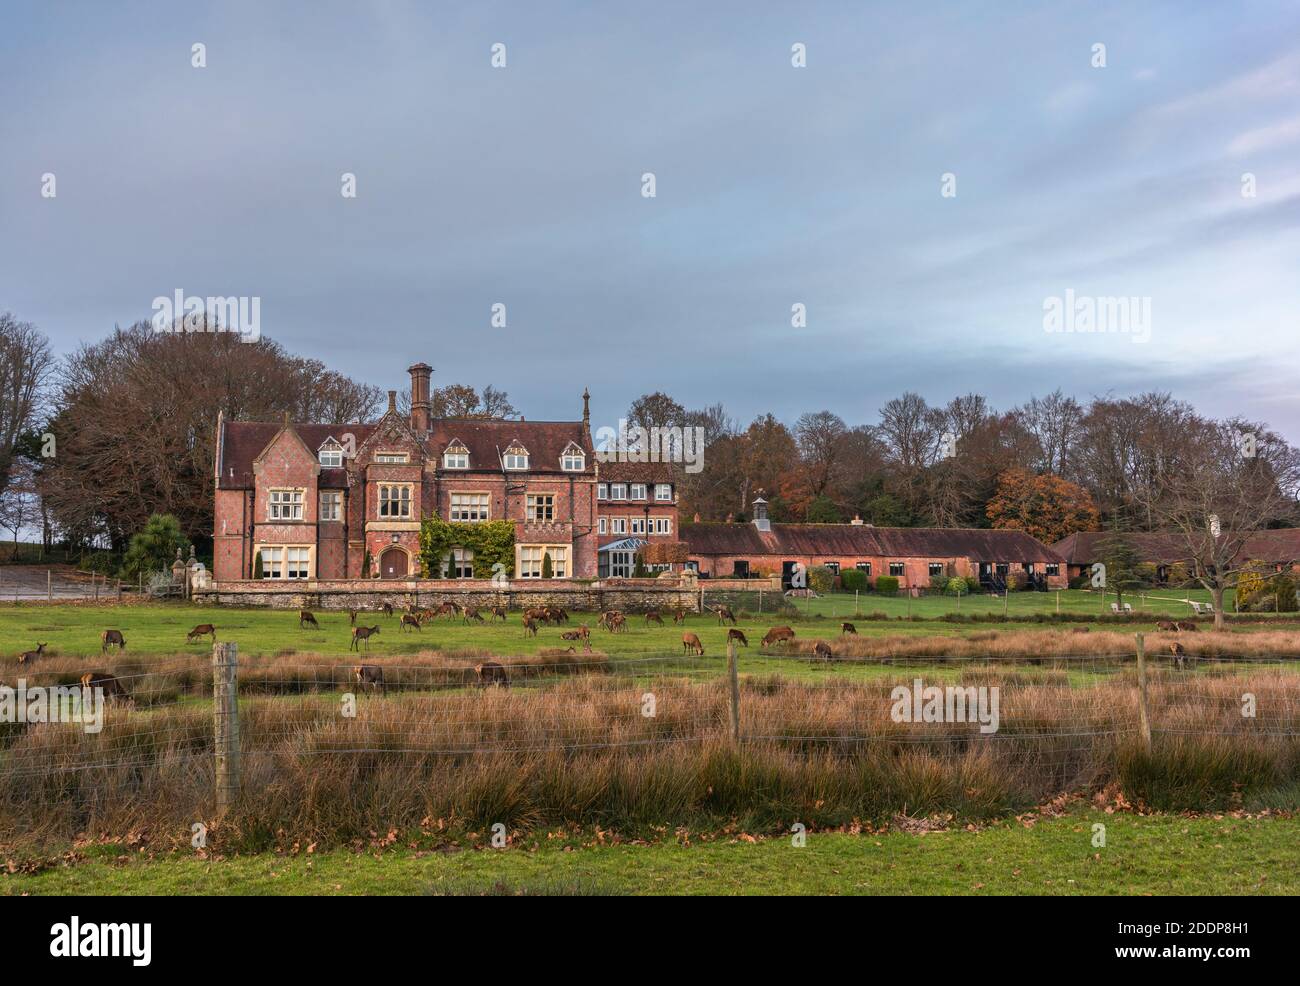 Burley Manor - a restaurant and hotel in Burley village New Forest National Park with deers grazing outside, Hampshire, England, UK Stock Photo